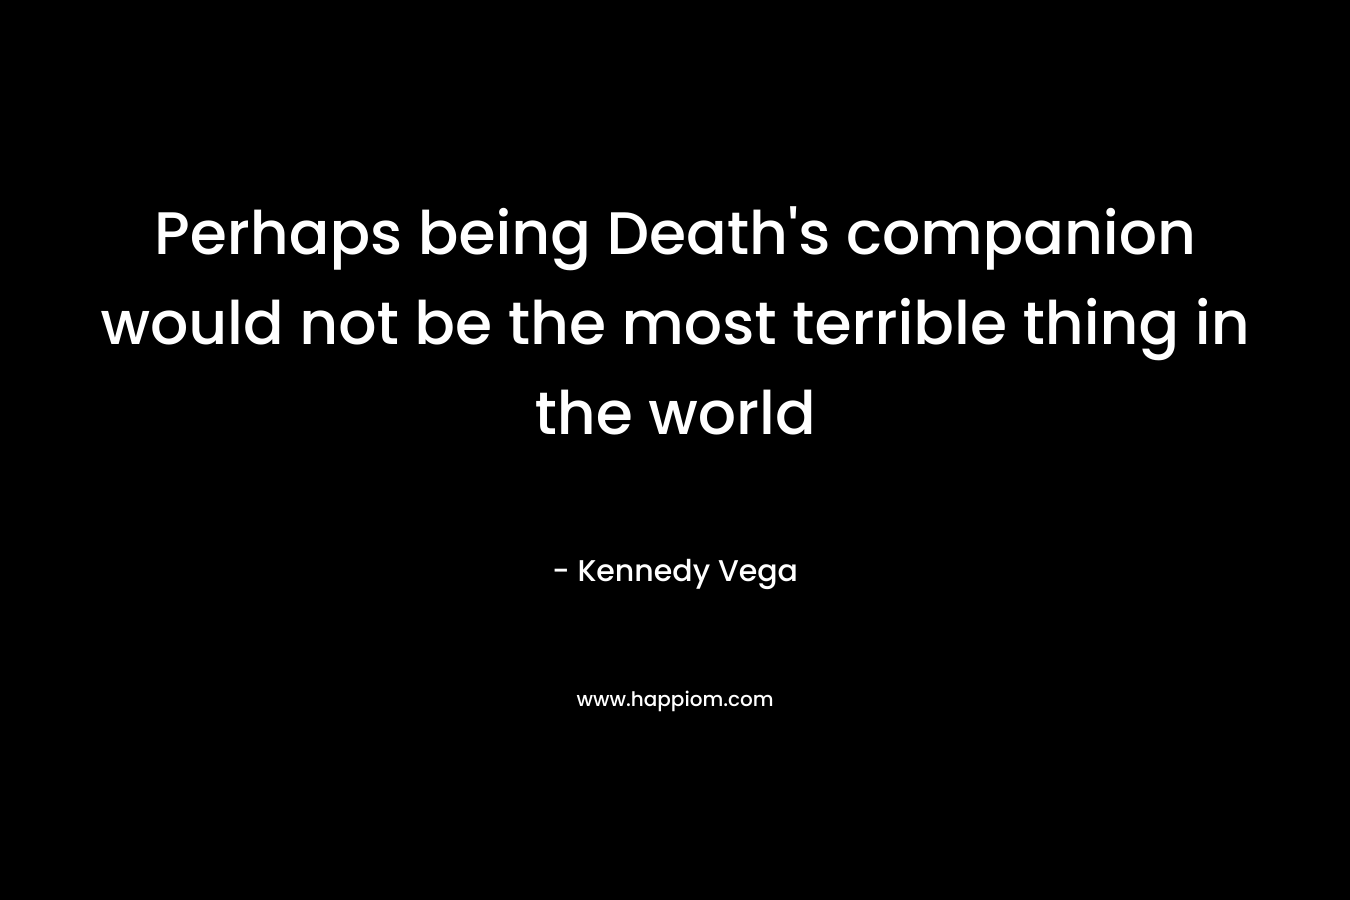 Perhaps being Death’s companion would not be the most terrible thing in the world – Kennedy Vega